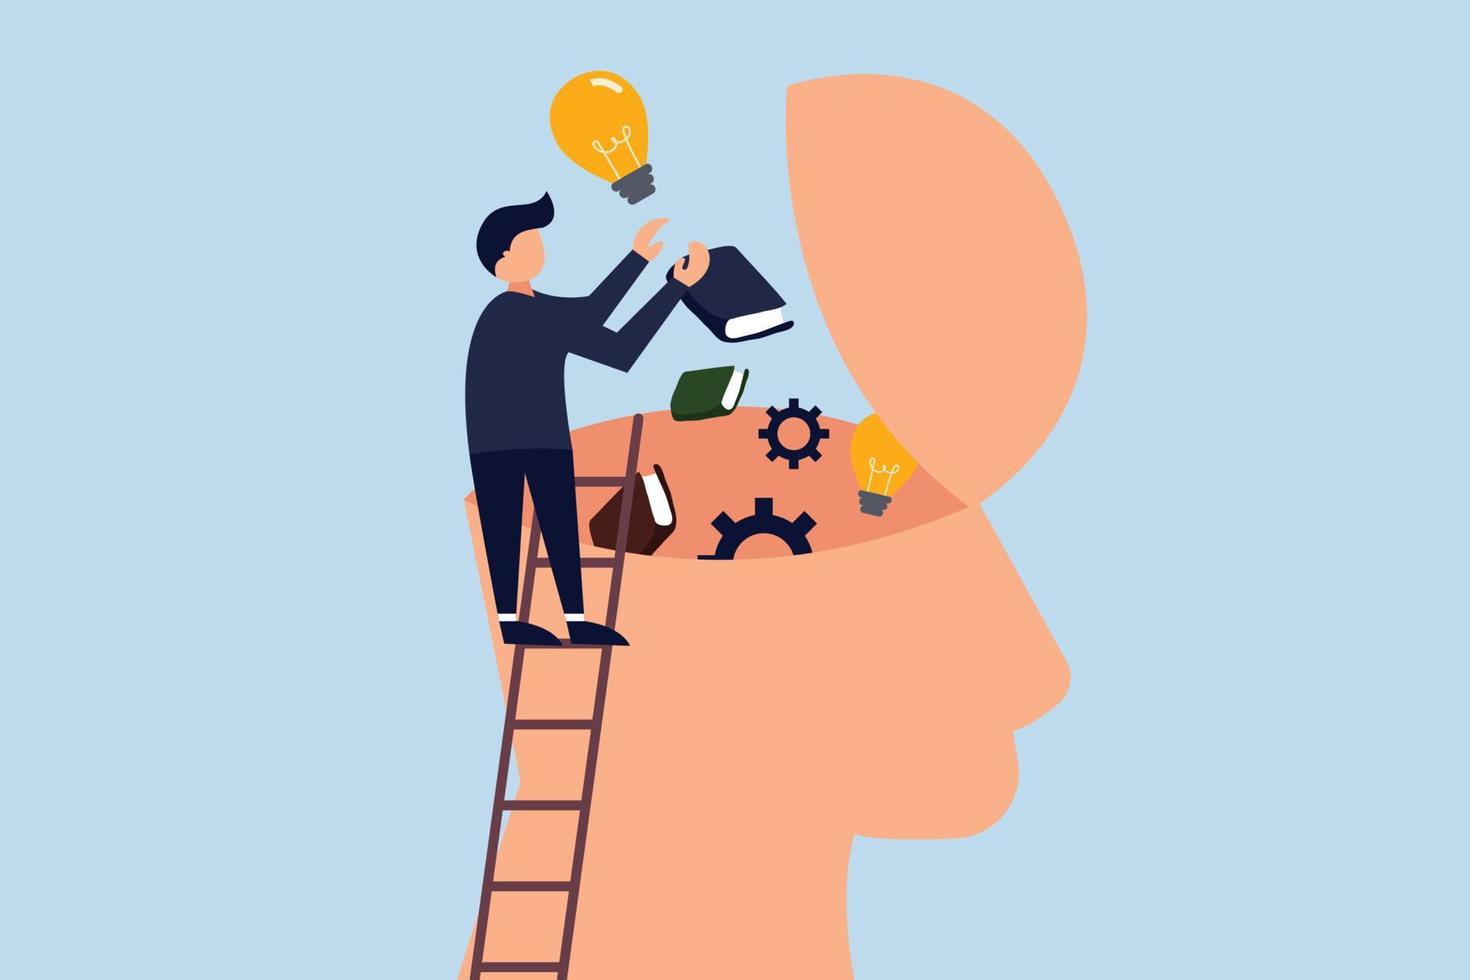 Upskill, learn new things or knowledge development for new skill and improve job qualification concept, man putting light bulb ideas, and books into human head to upgrade working skill. vector